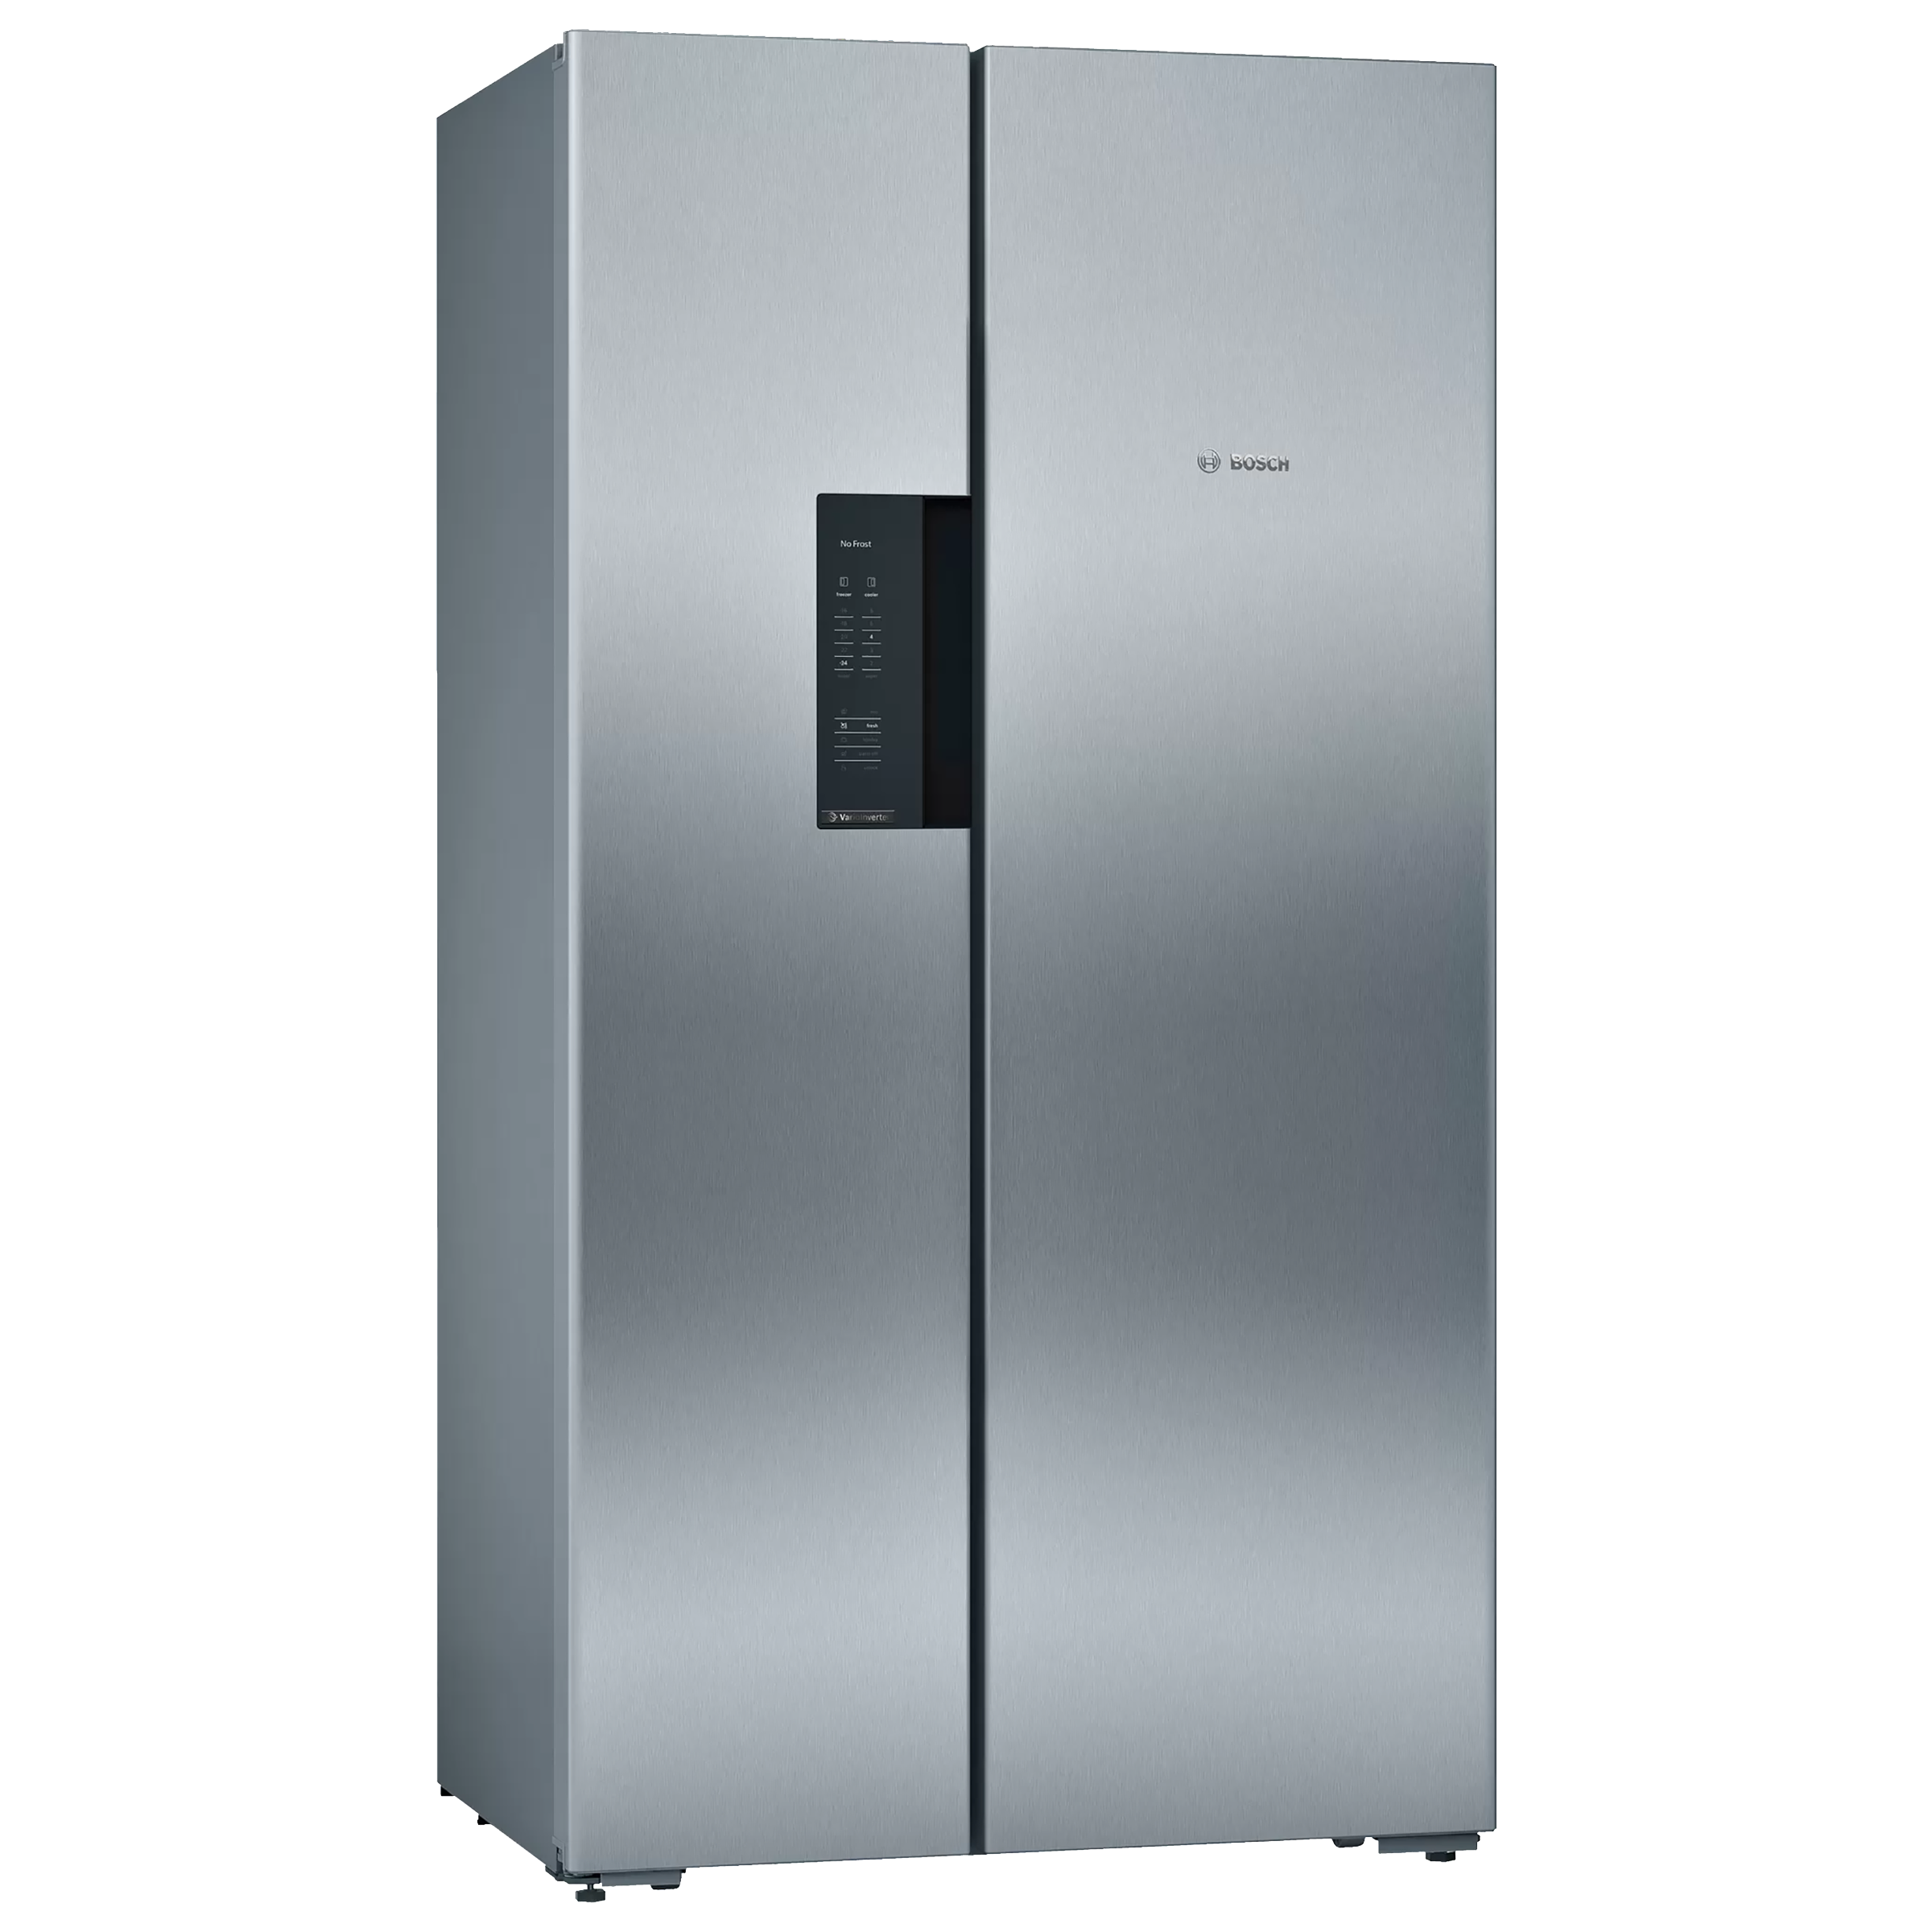 Buy Bosch Series 4 661 Litres Frost Free Side by Side Refrigerator with ...